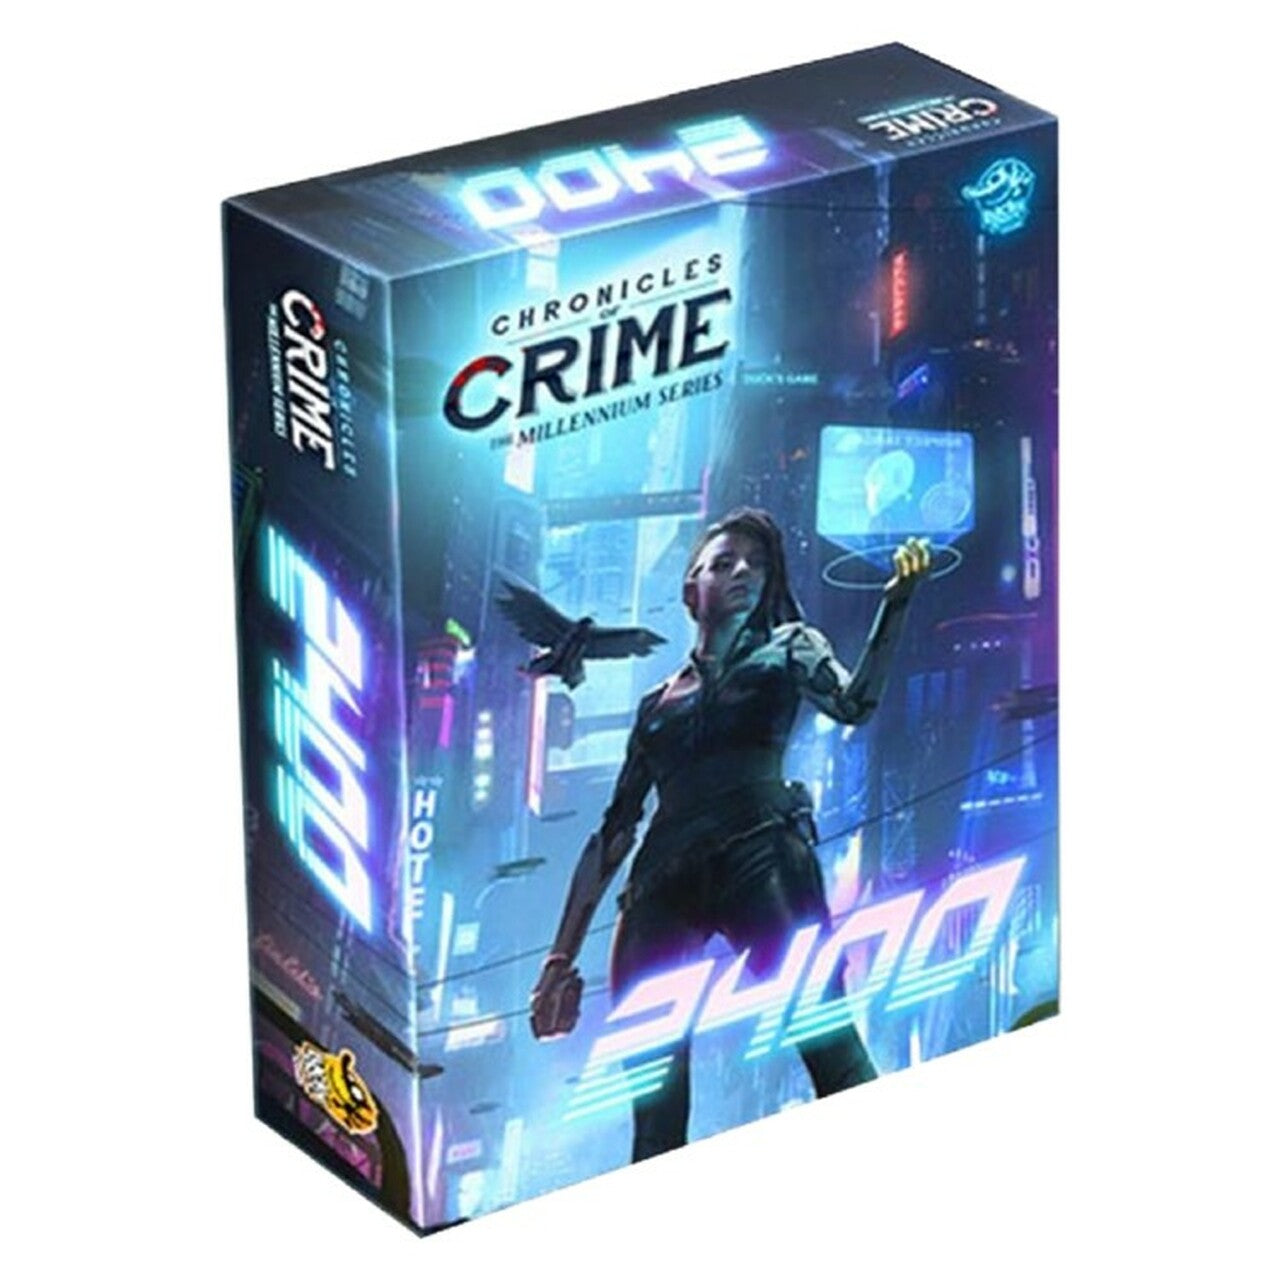 2400 Chronicles Of Crime: The Millennium Series